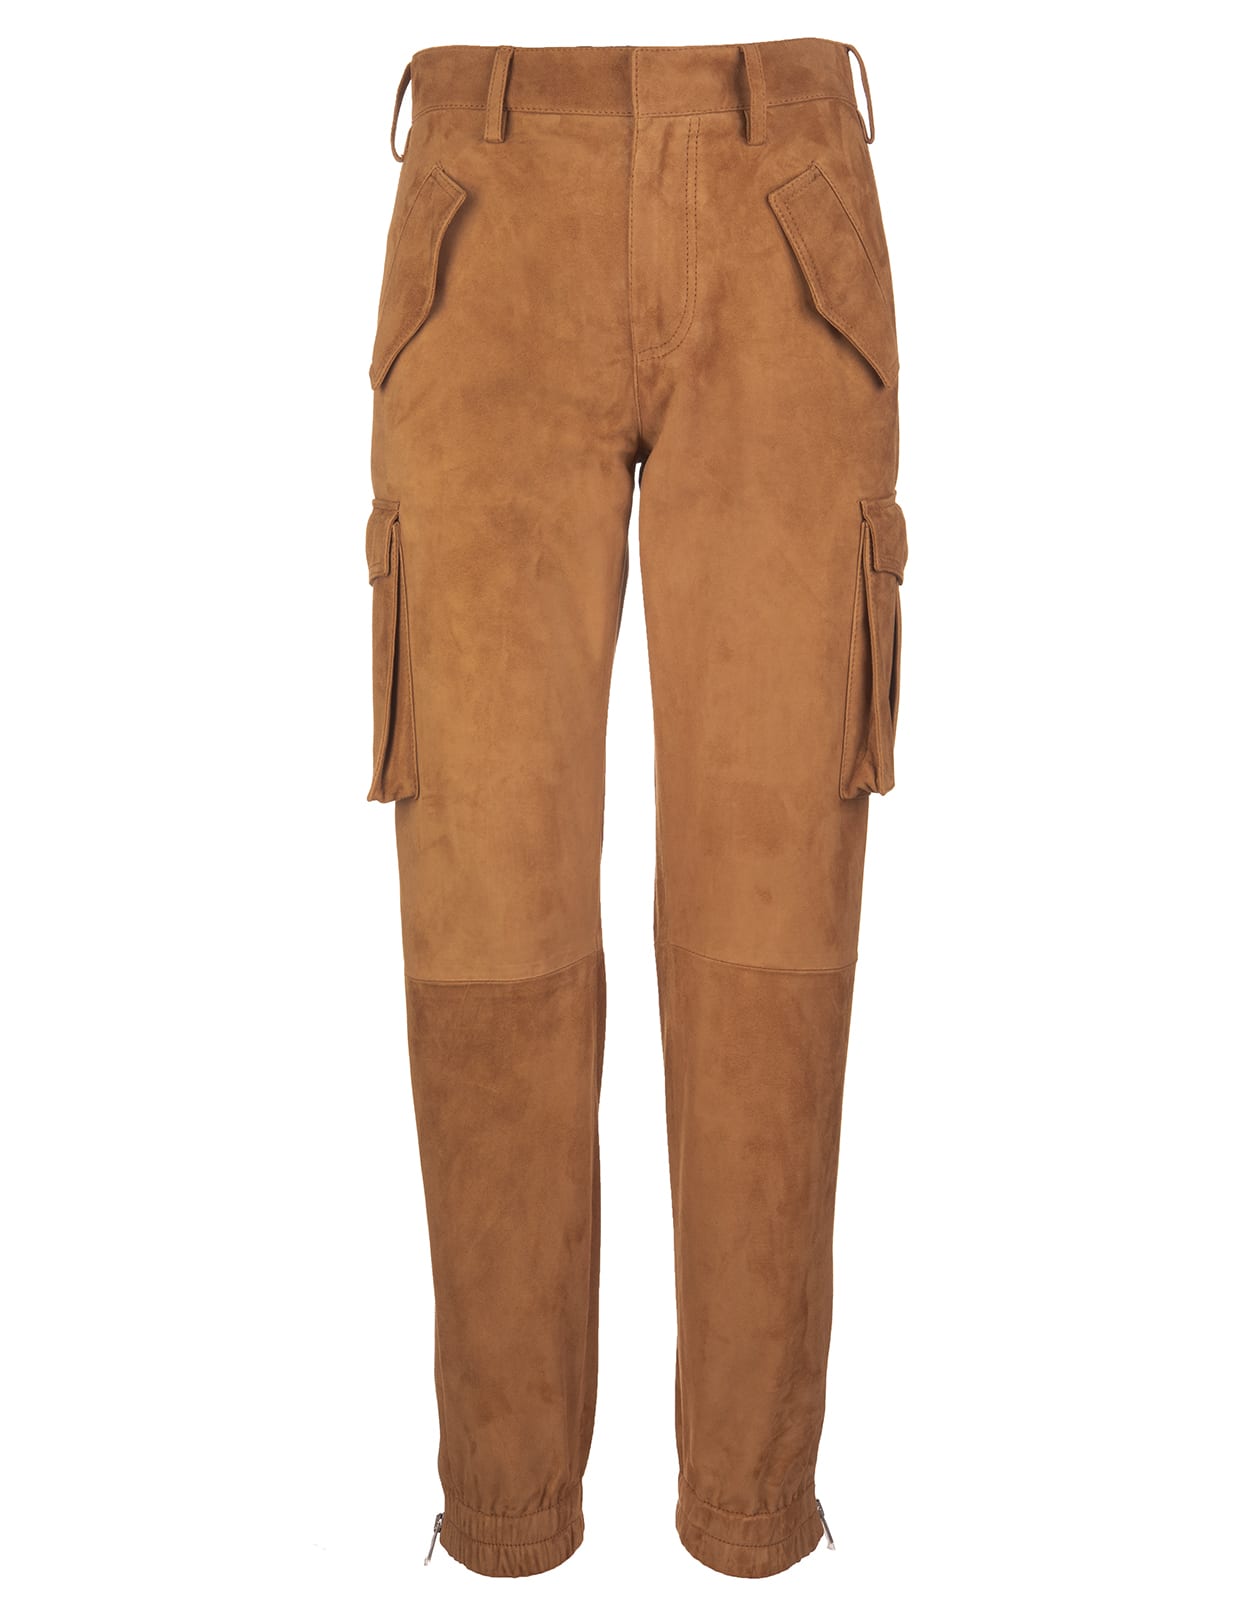 Ermanno Scervino Woman Cargo Pants In Light Brown Suede Leather